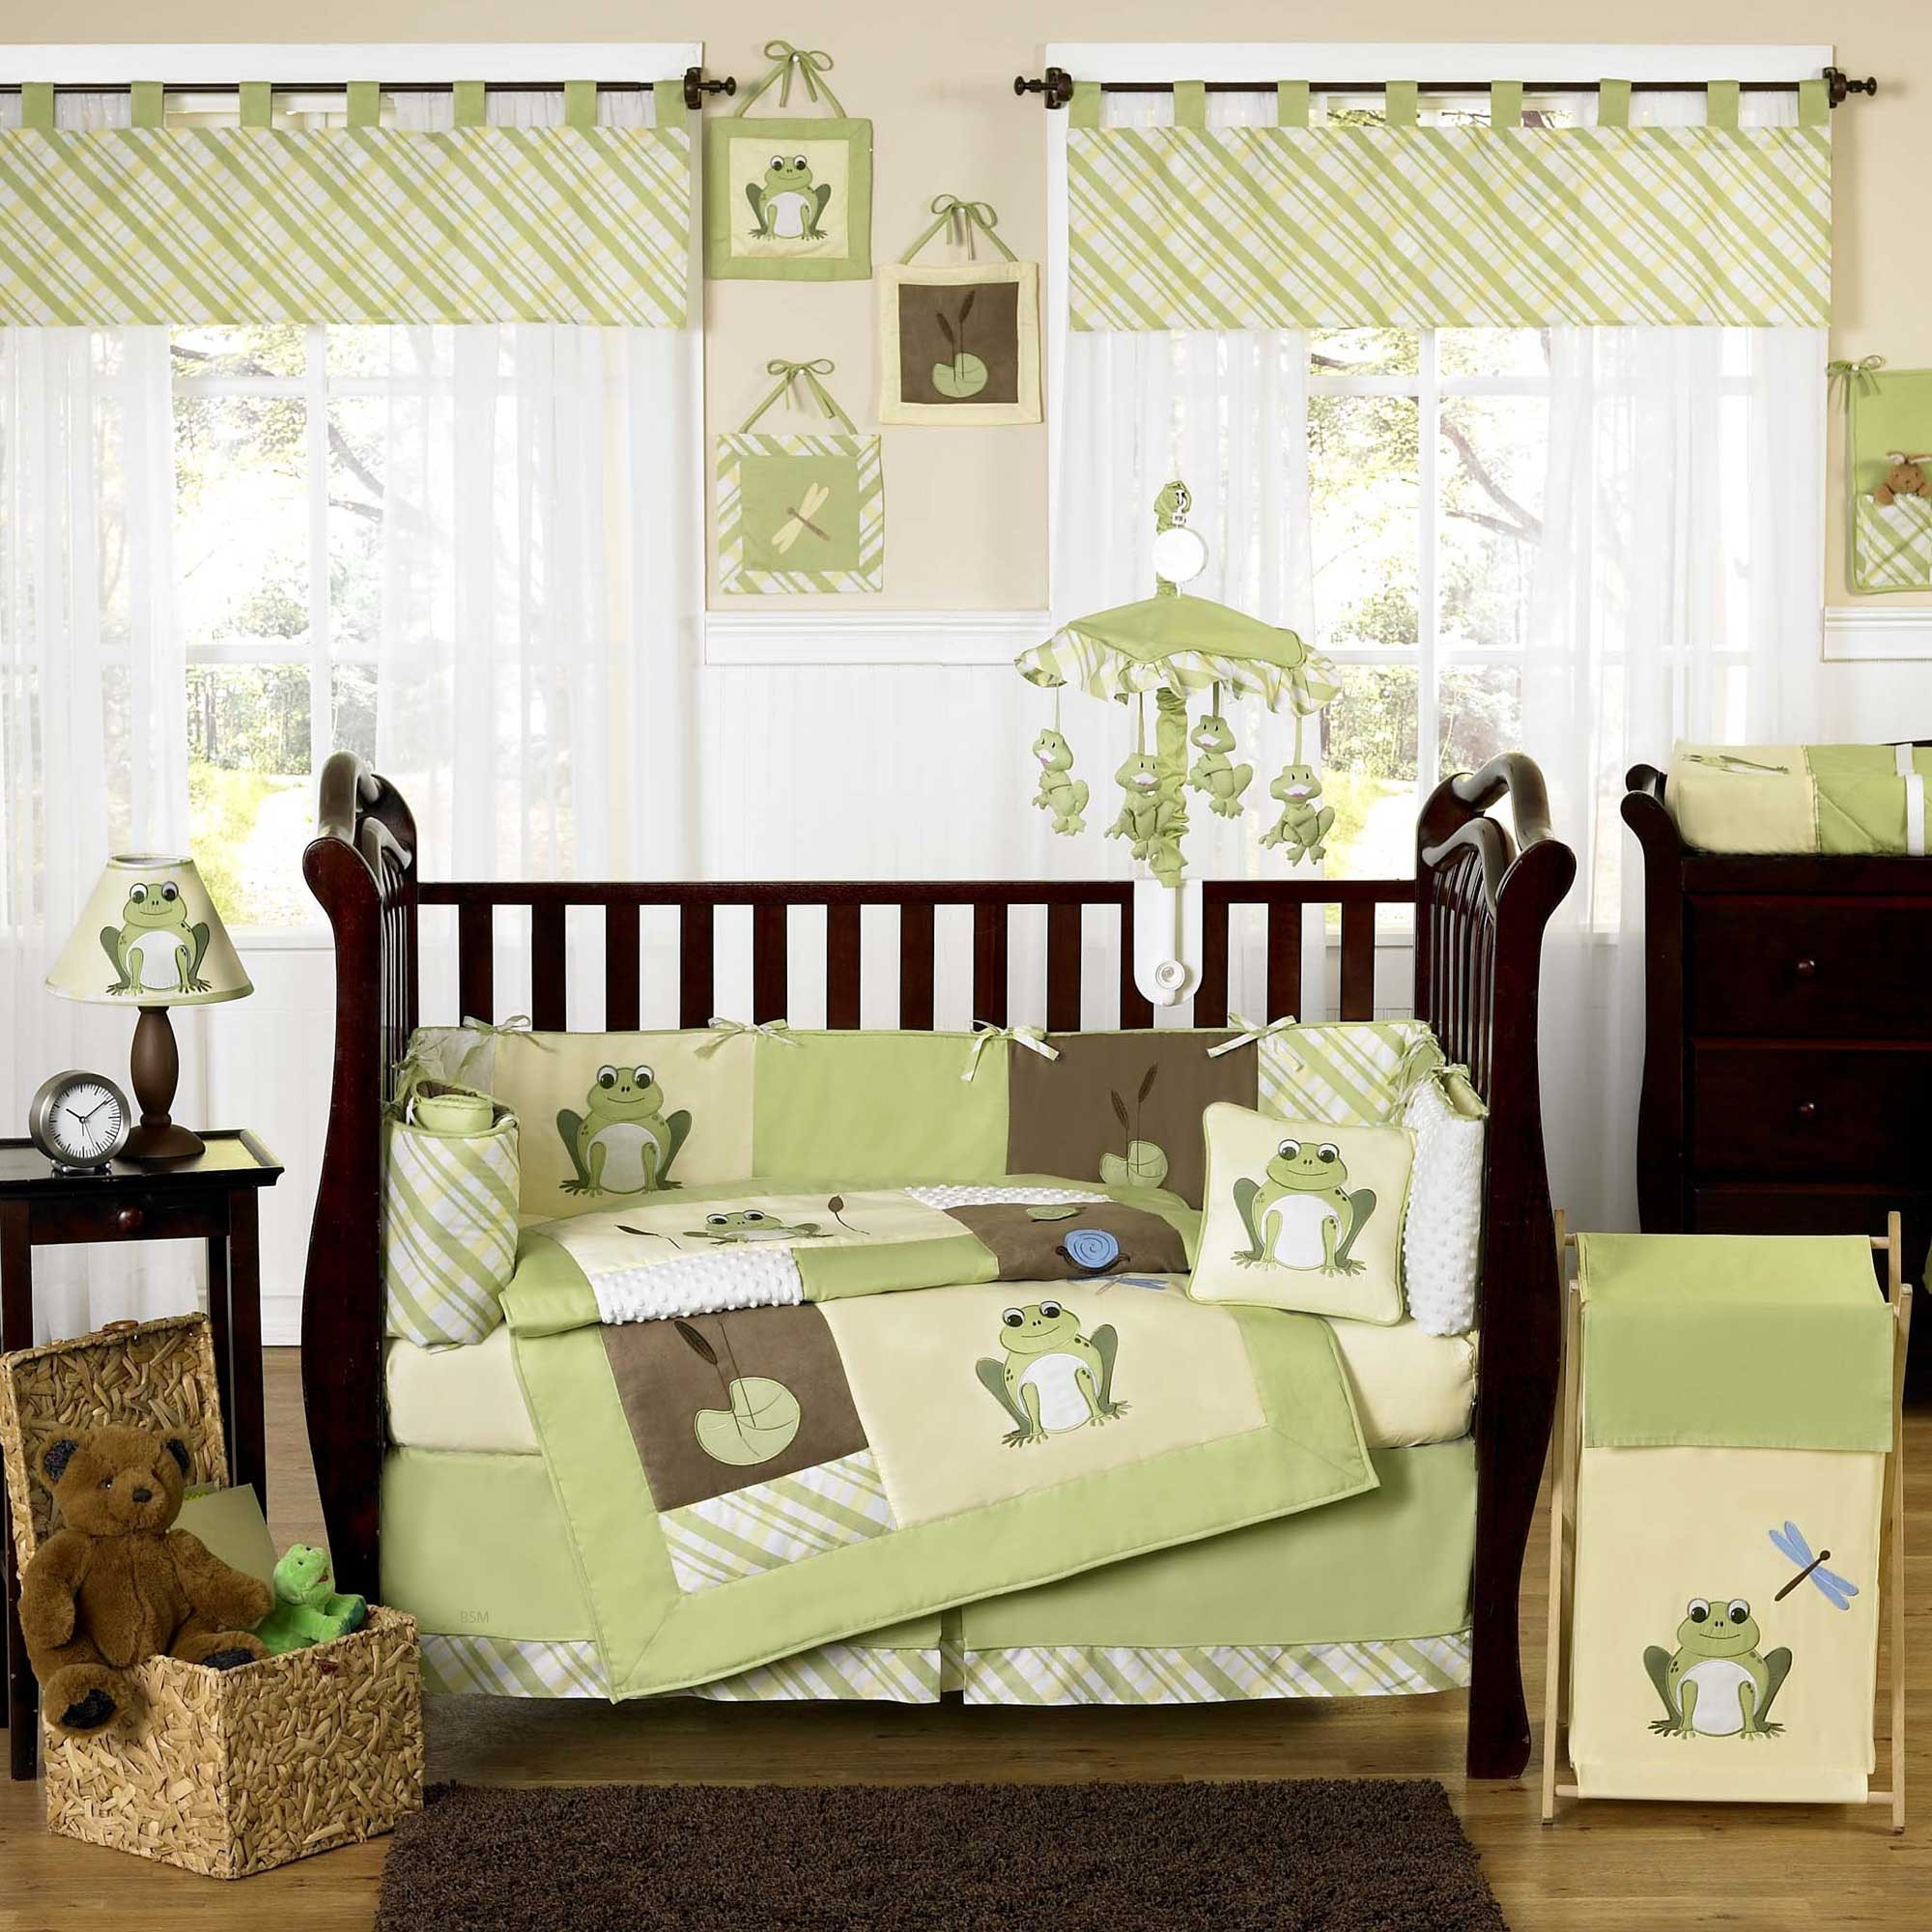 Baby Boy Rooms Decorating Ideas
 Themes For Baby Rooms Ideas – HomesFeed